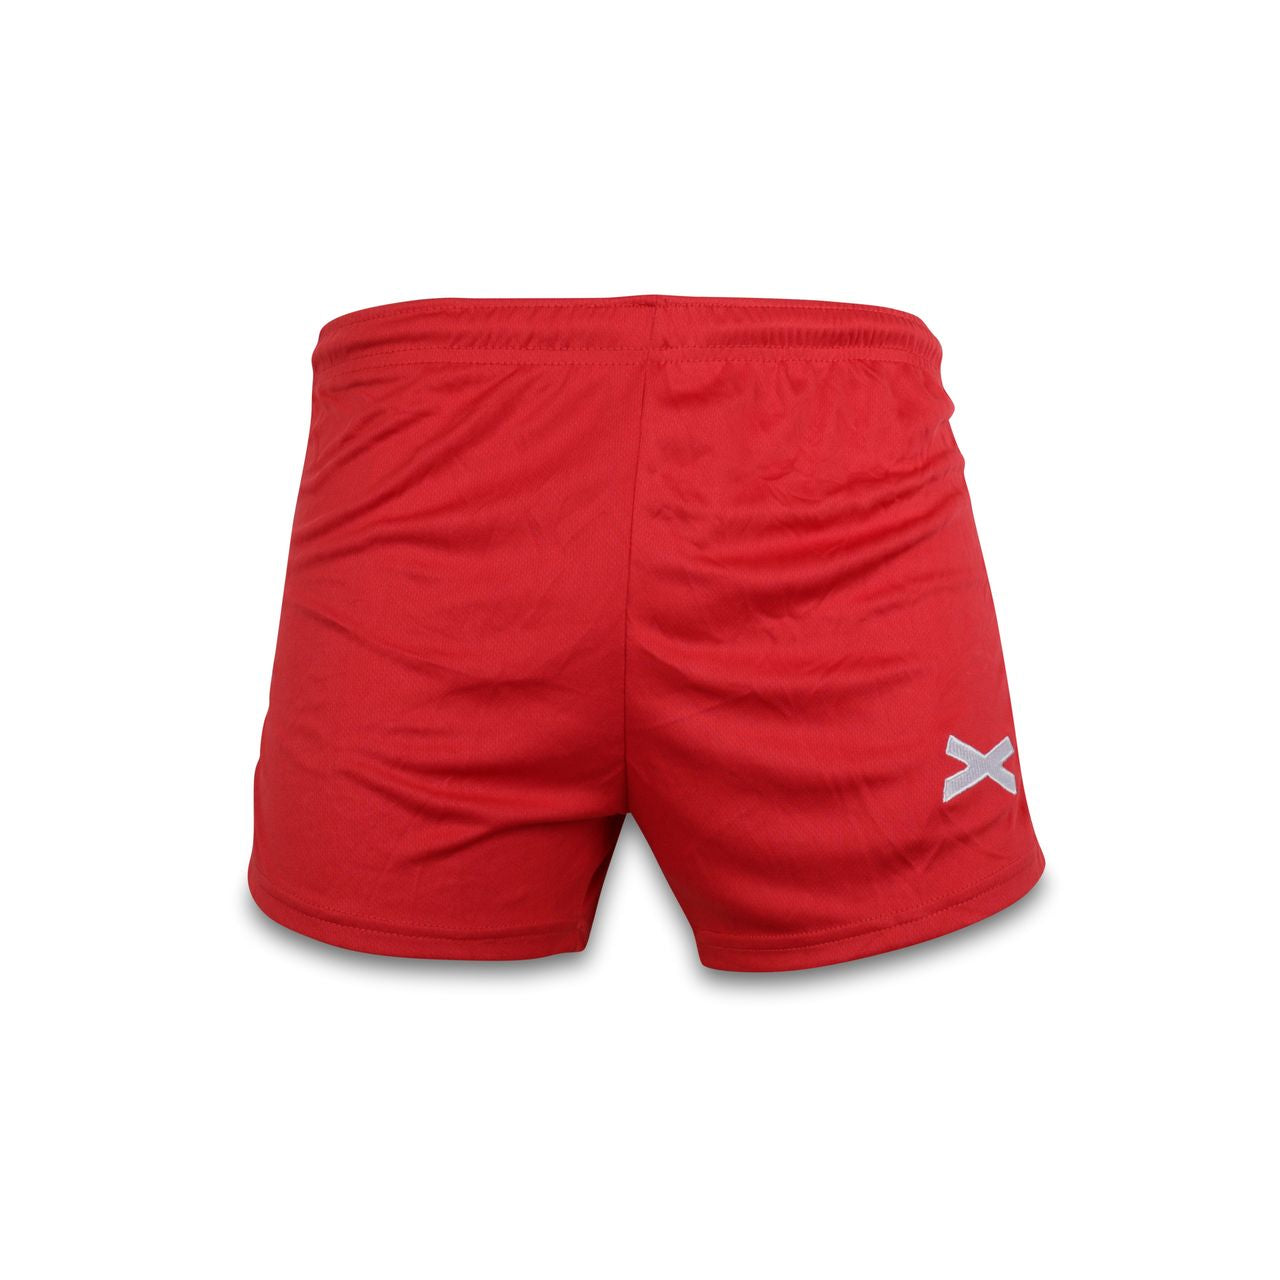 GAA Shorts Red with White Stripes Gaelic Games Sportswear